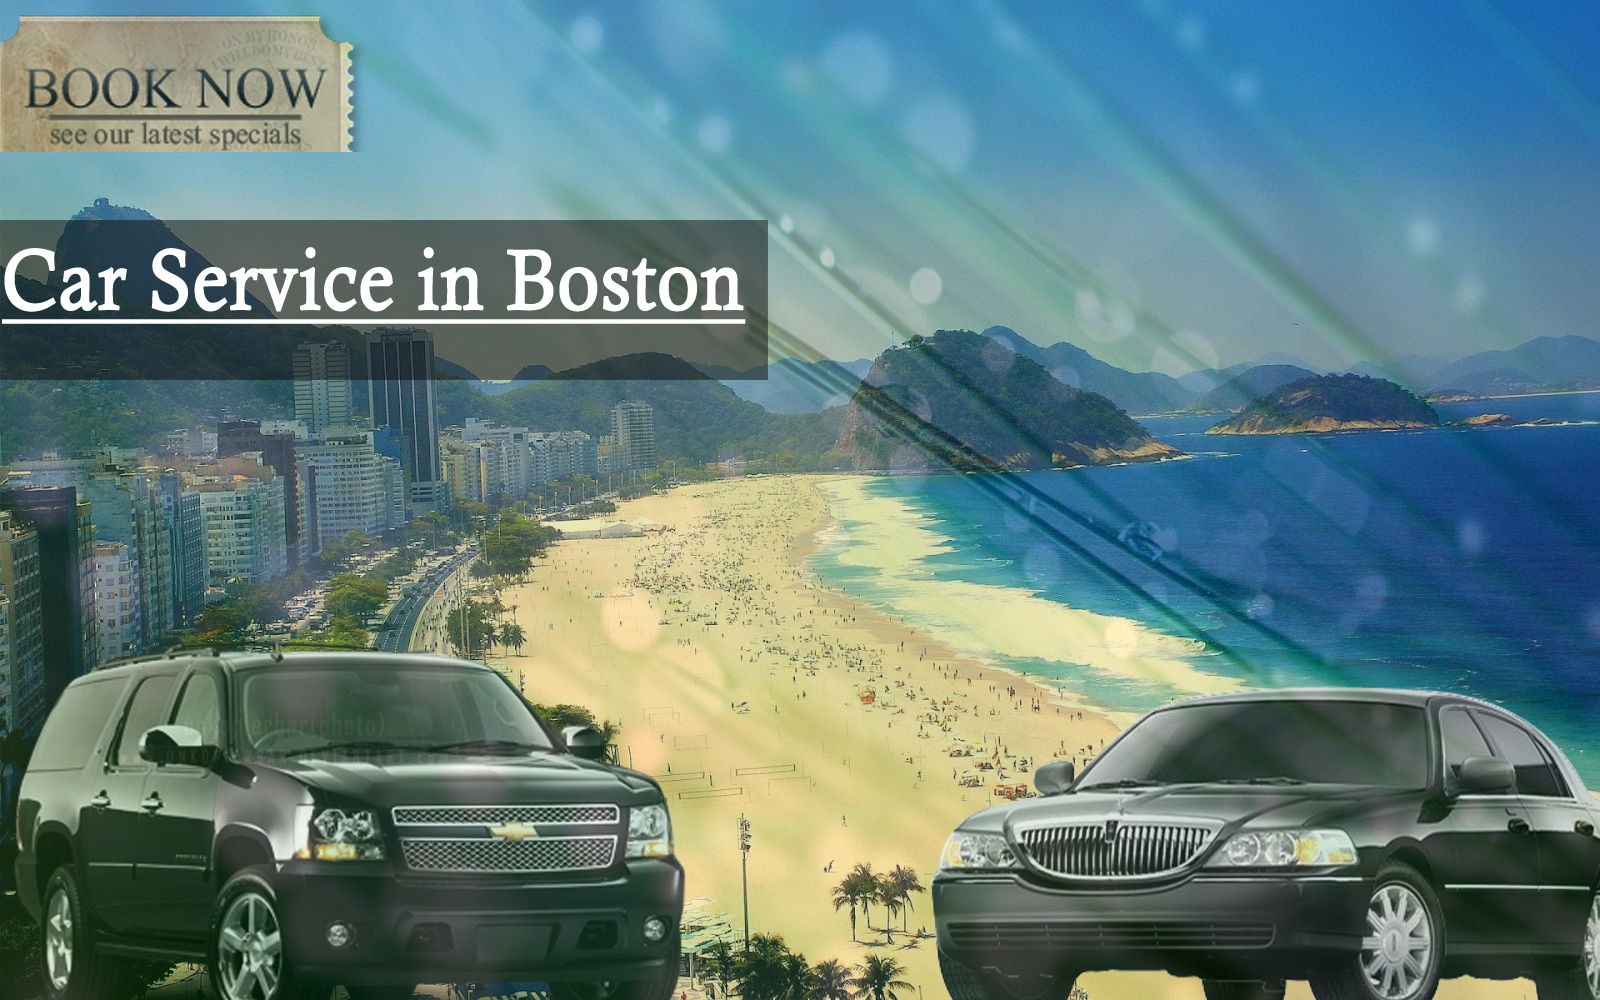 Enjoy vacation with Boston Airport Car Service - Carserviceinboston.com